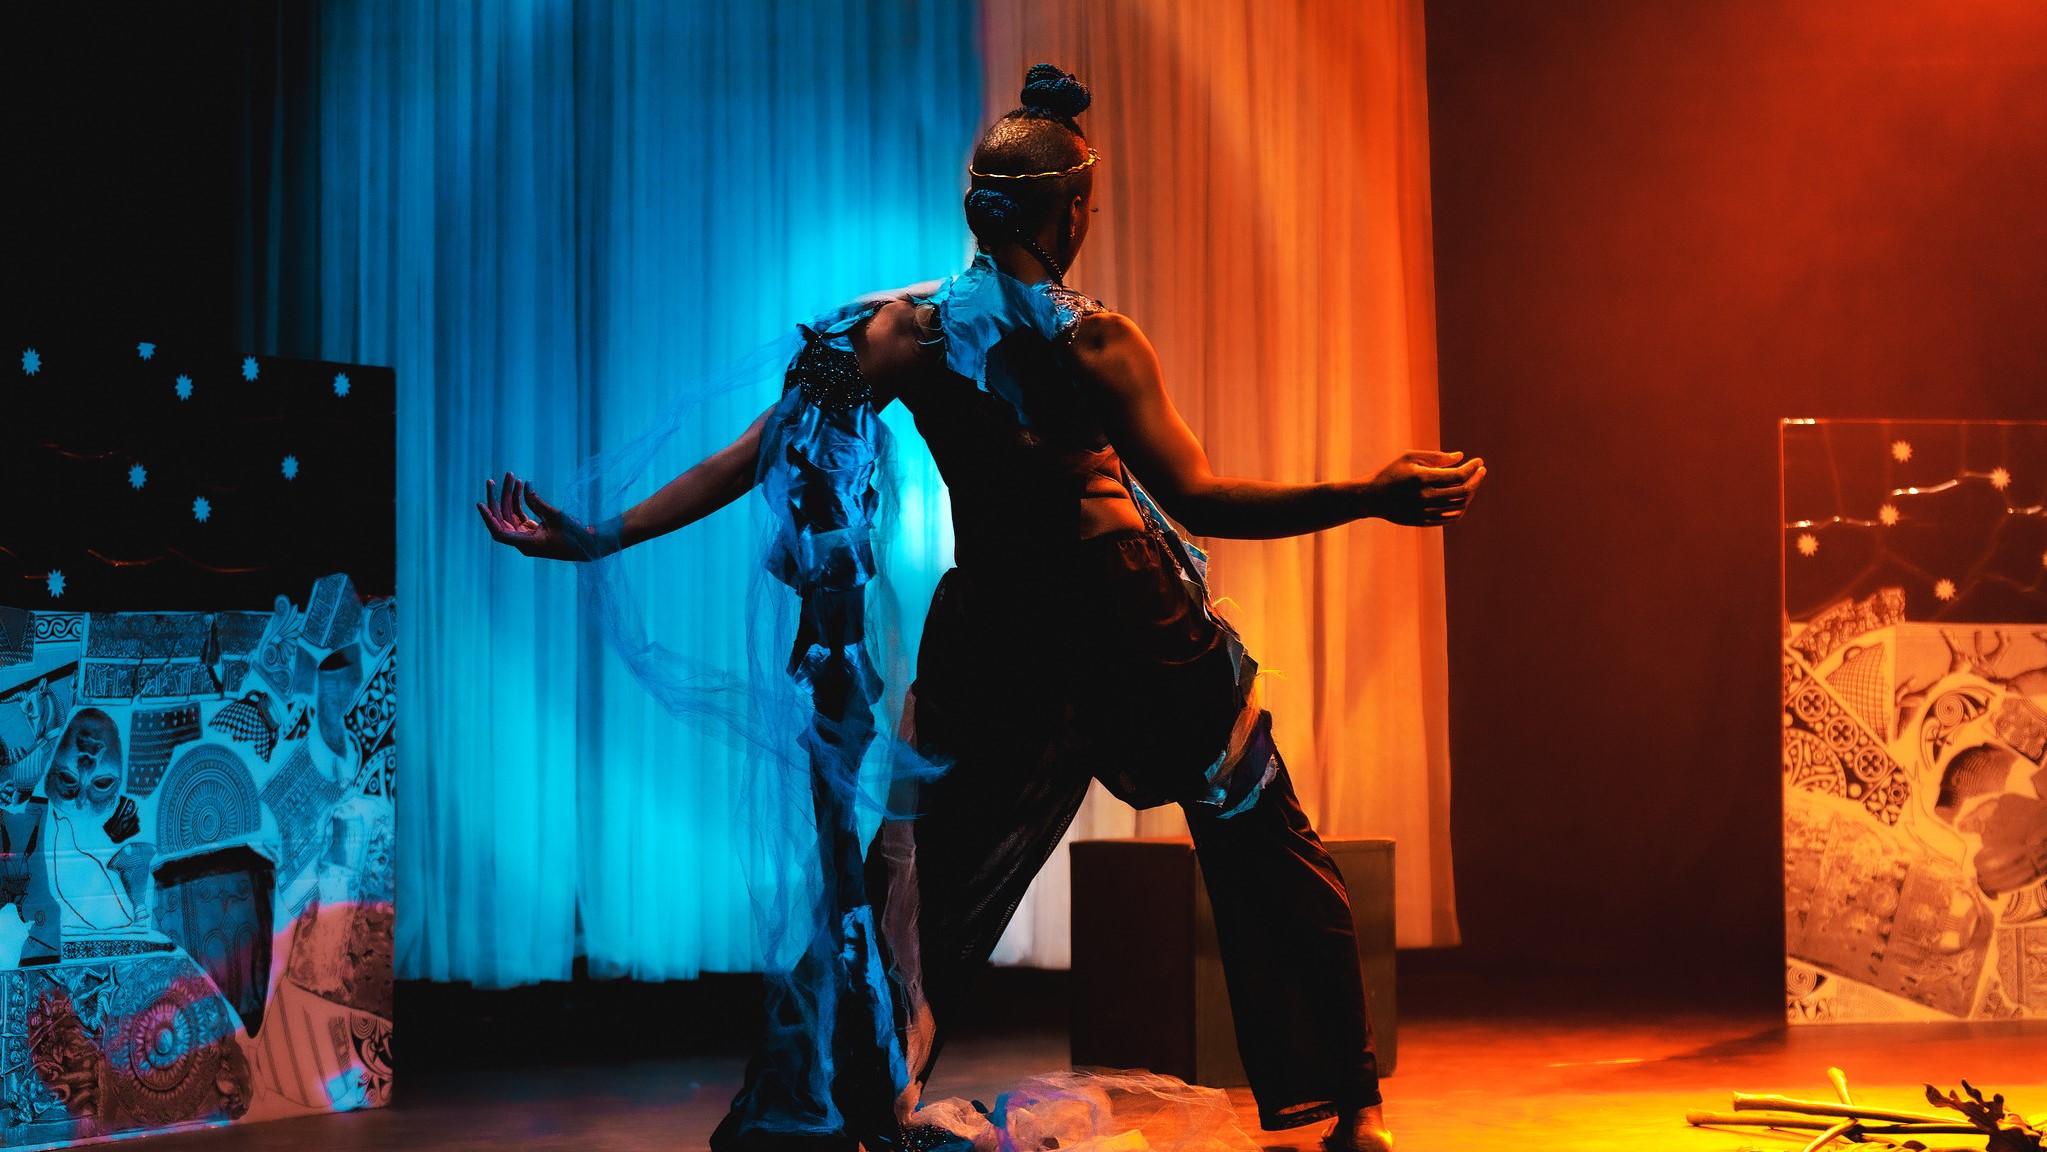 A picture from The New Embassy series, featuring Jaz Fairy J dancing on a stage lit with blue and orange lights.